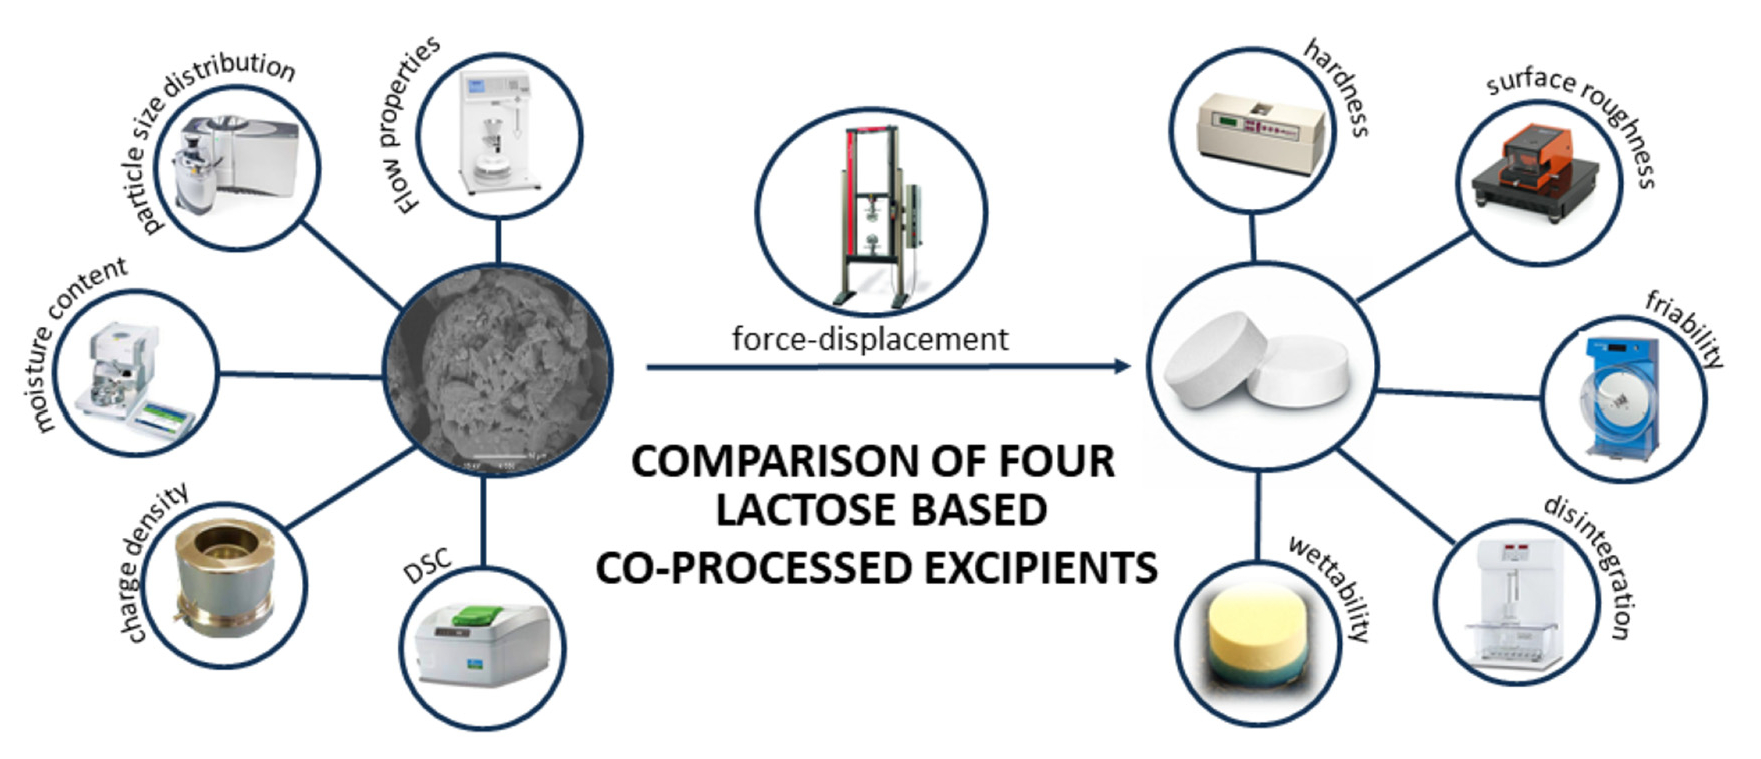 graphical abstract of Comparison of Flow and Compression Properties of Four Lactose-Based Co-Processed Excipients: Cellactose® 80, CombiLac®, MicroceLac® 100, and StarLac®